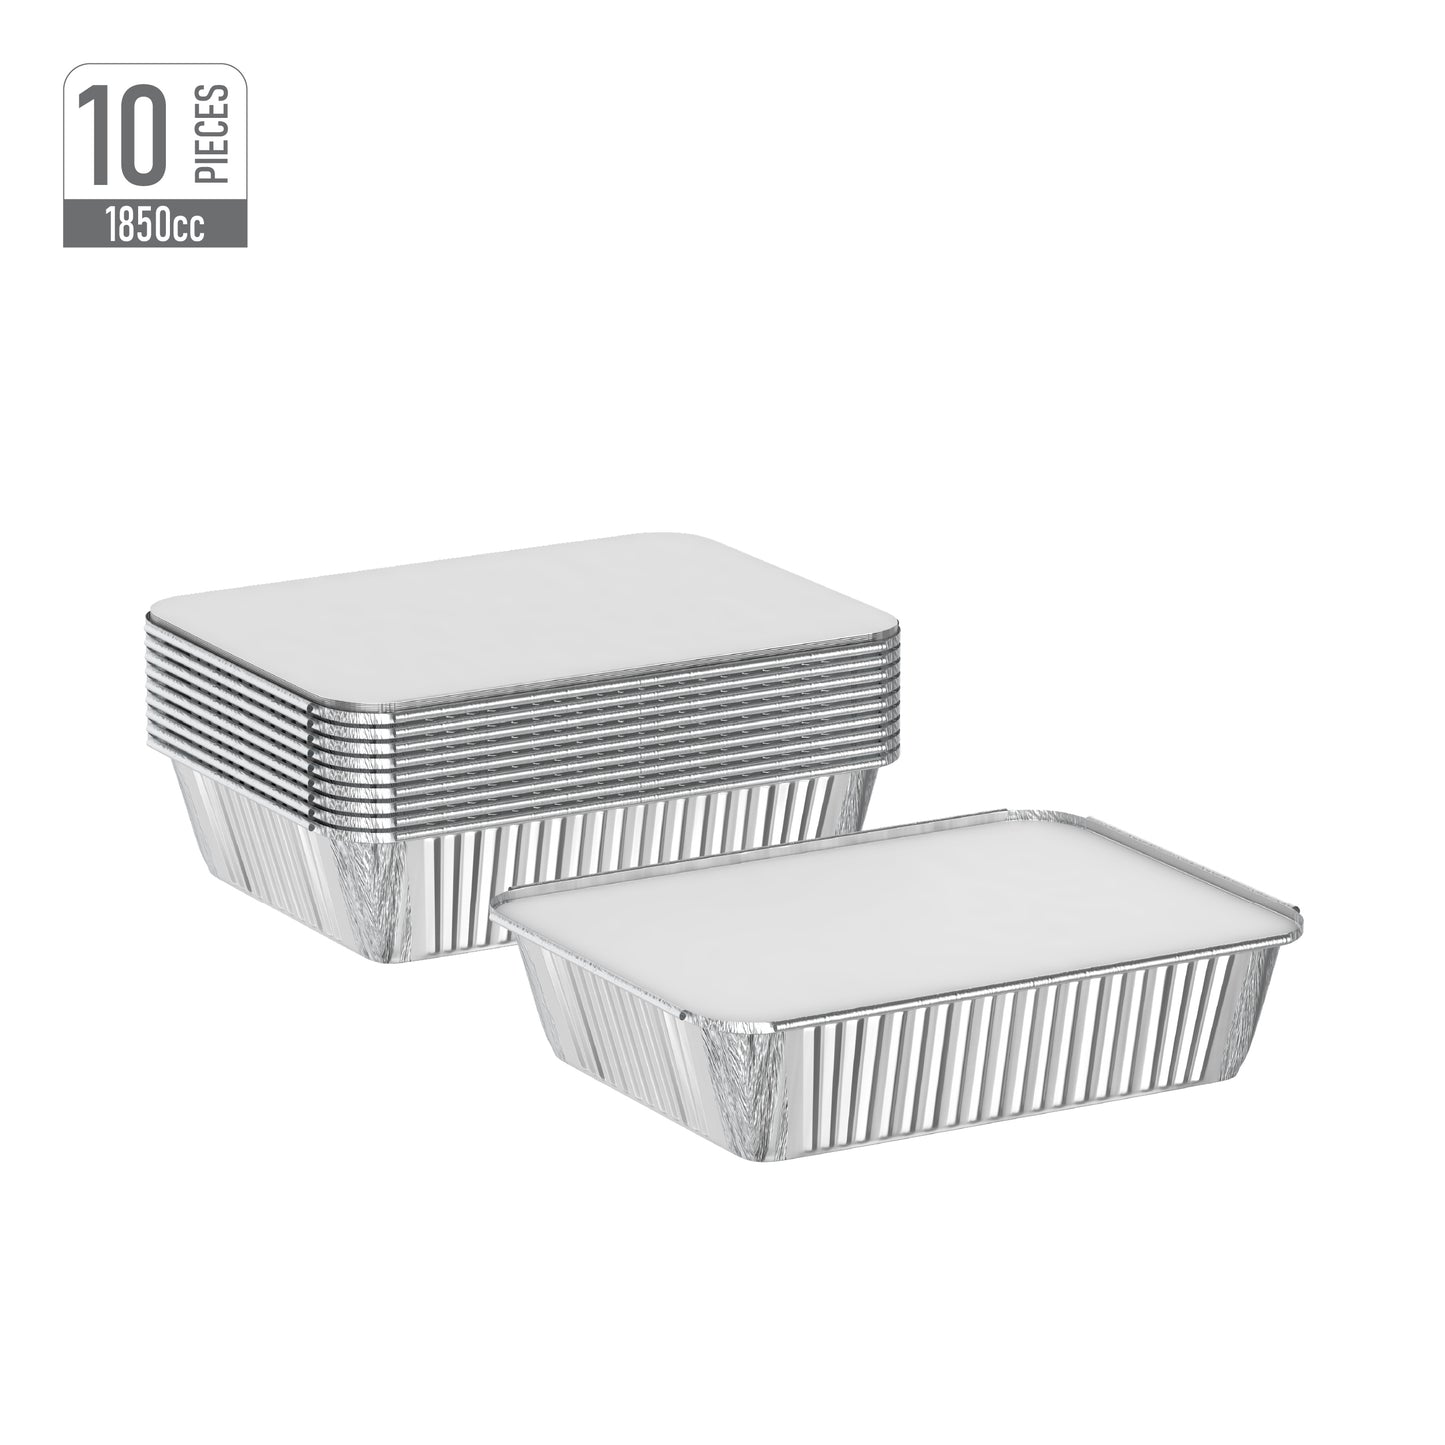 1850 cc Pack of 10 Aluminium Containers with Lids